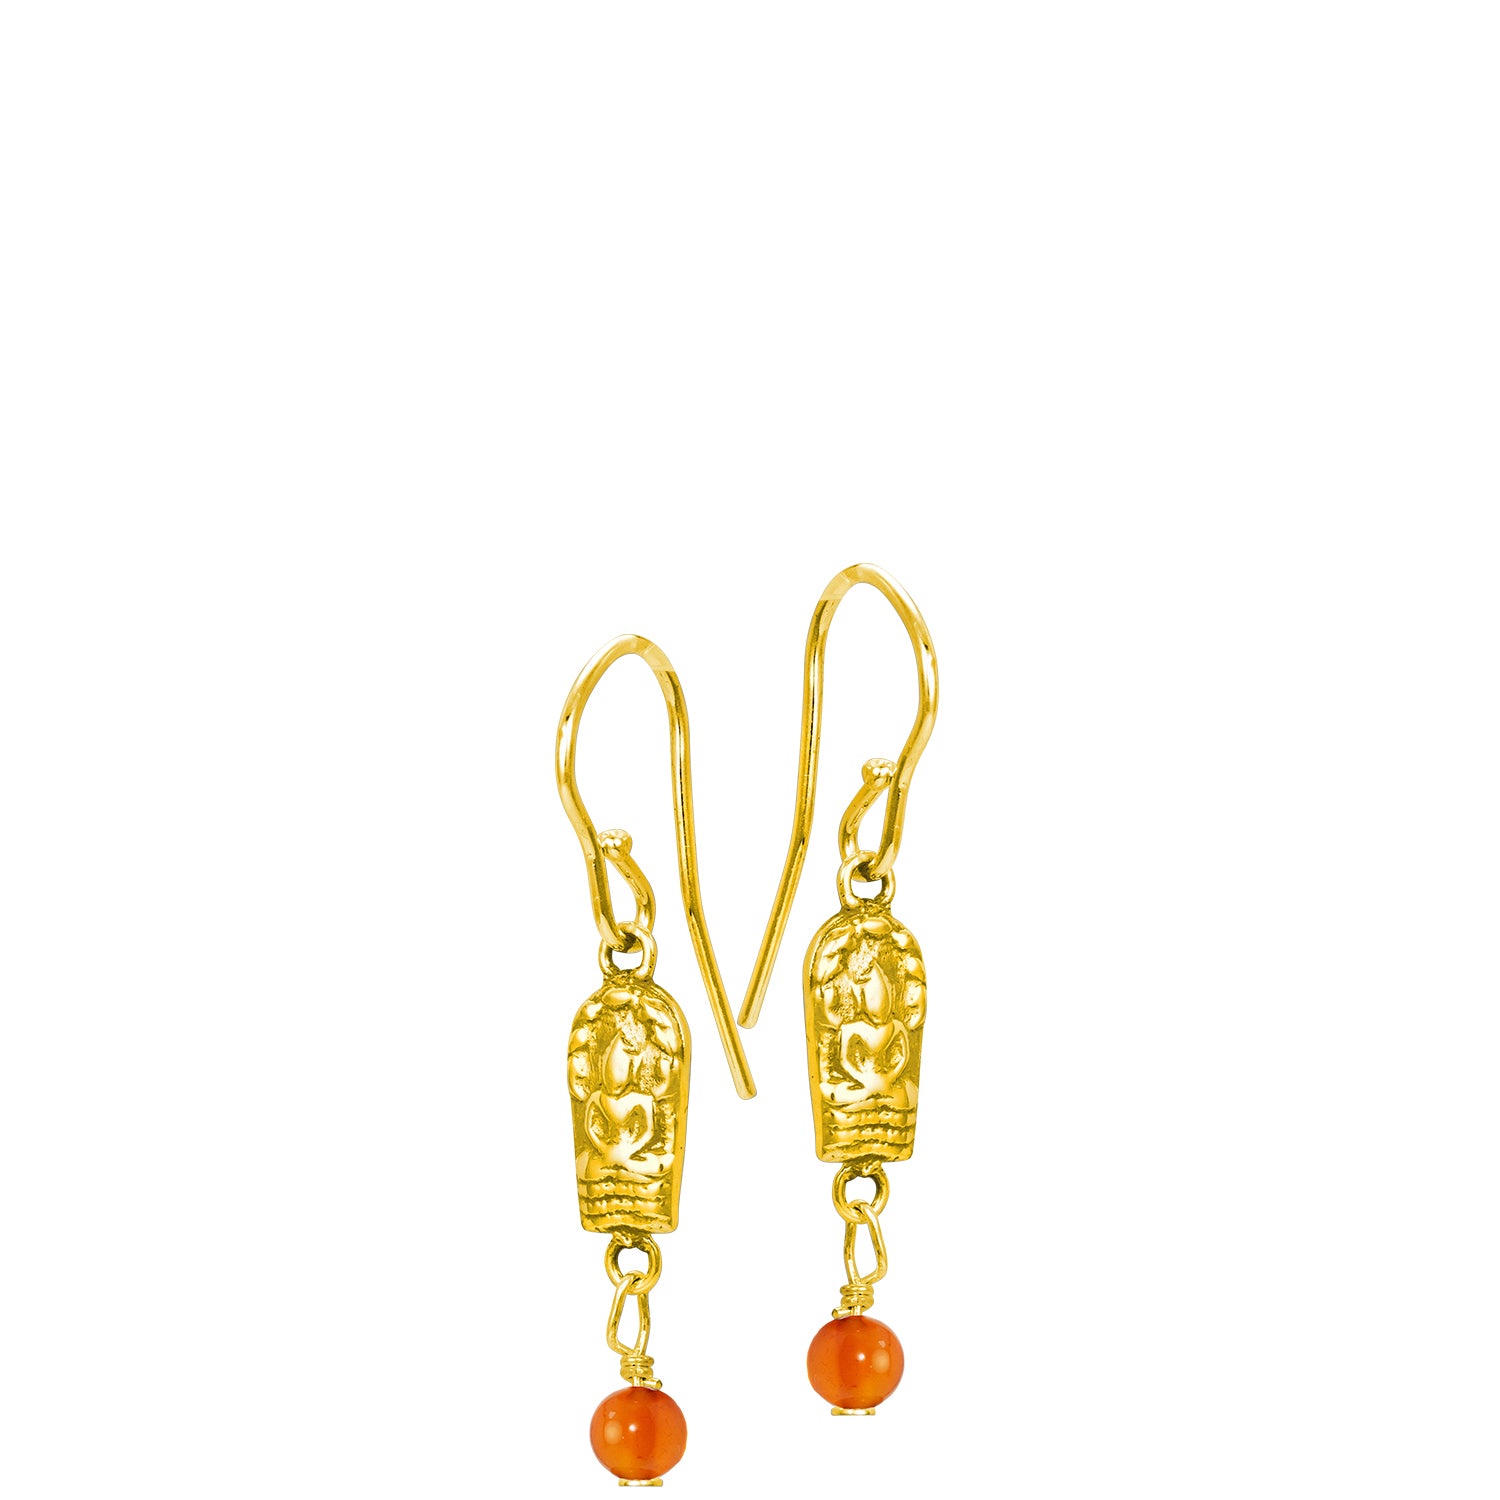 Buddha earrings mini gold-plated Sterling silver with carnelian beads from ETERNAL BLISS - high-quality spiritual jewelry